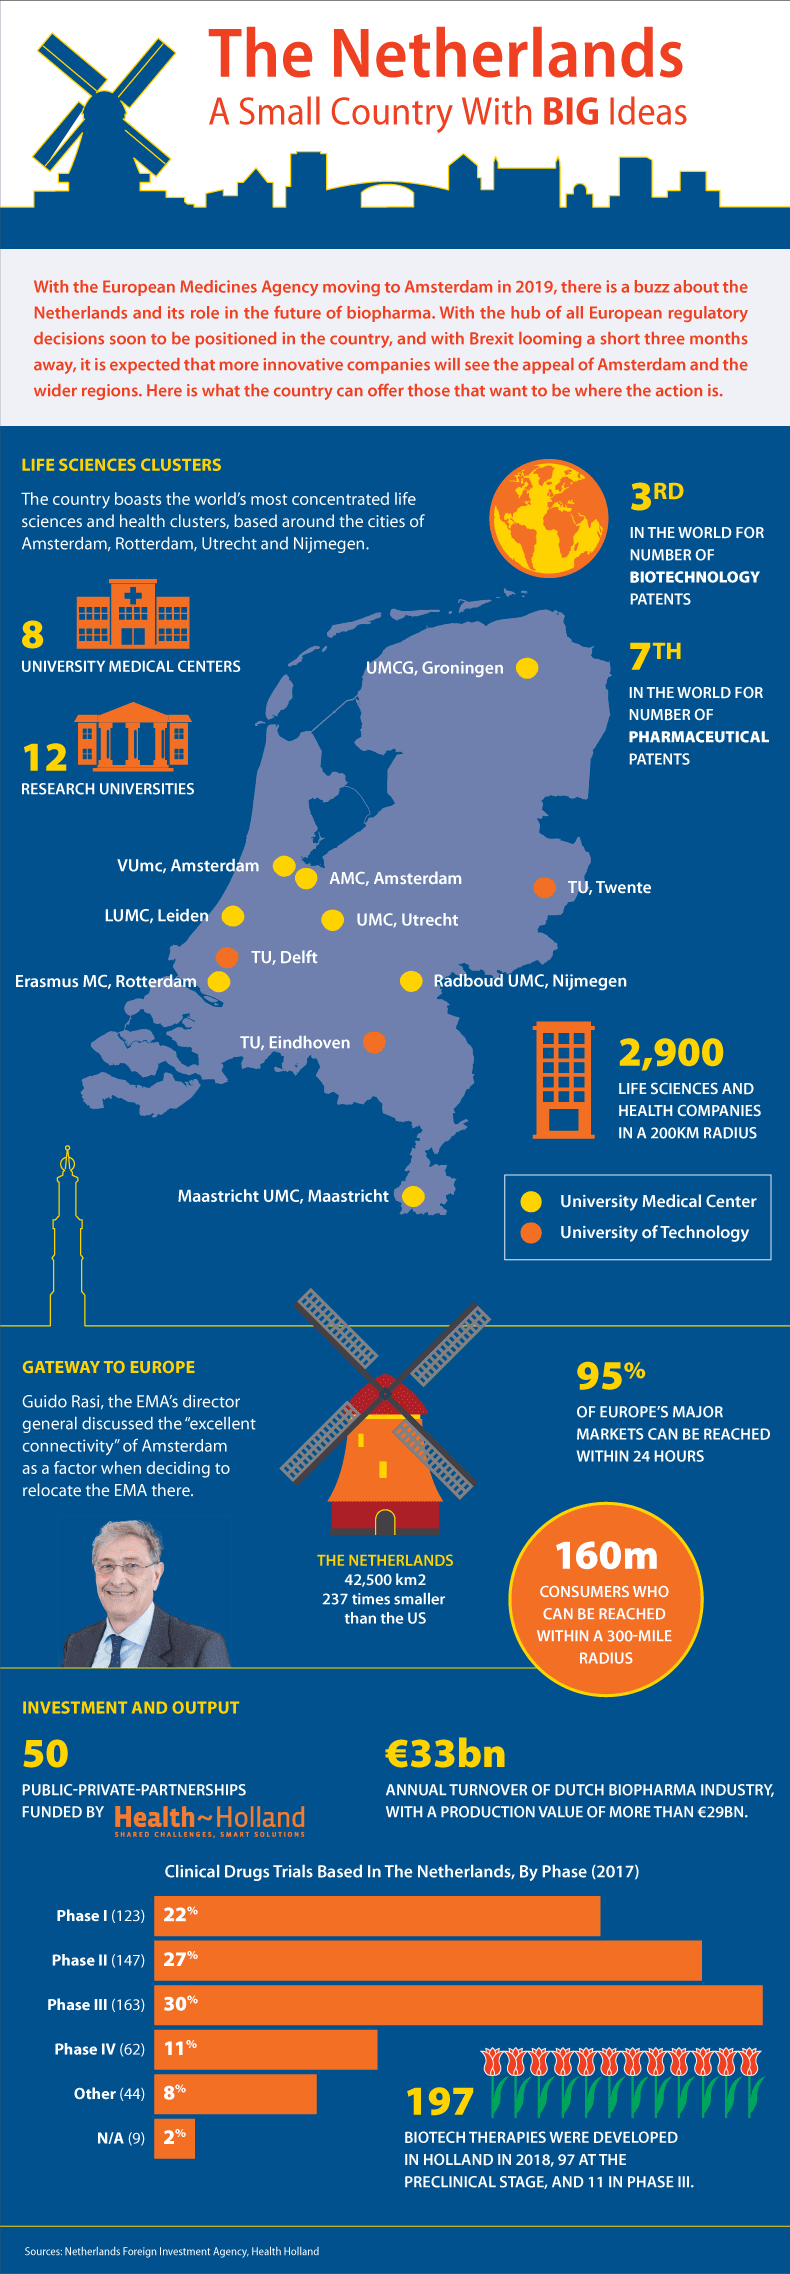 The Netherlands: A Small Country With Big Ideas